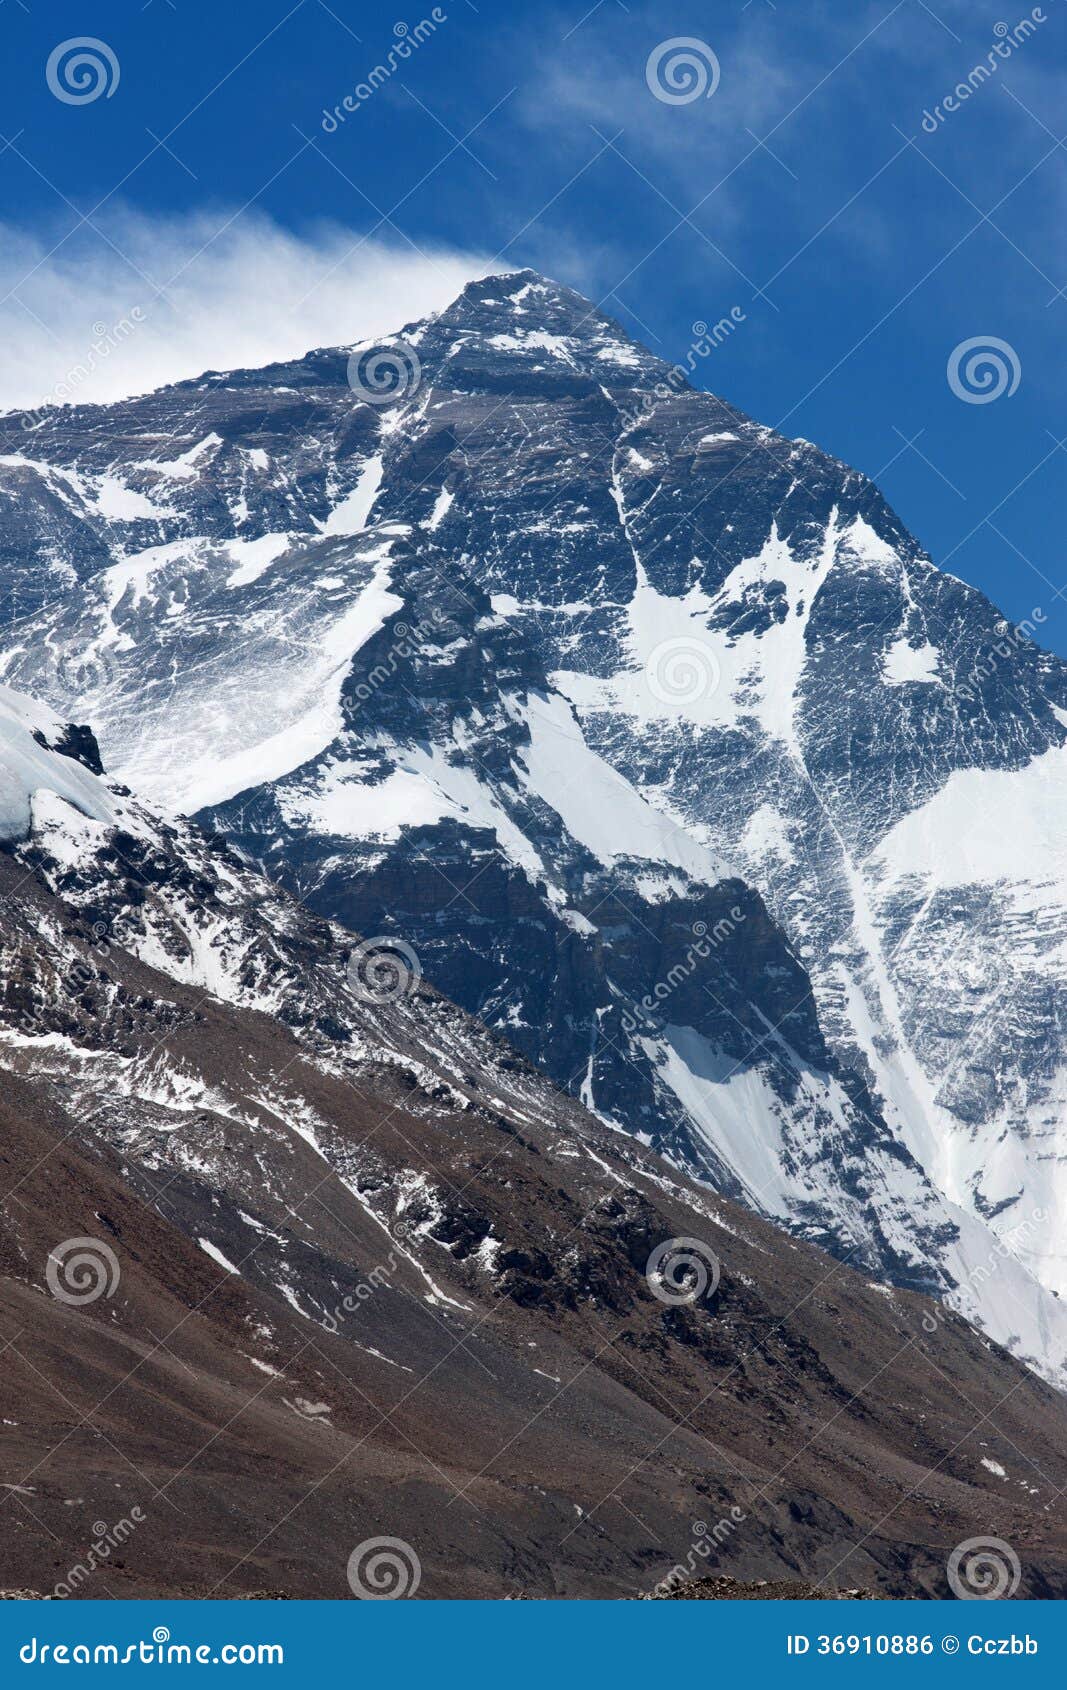 north face mount everest